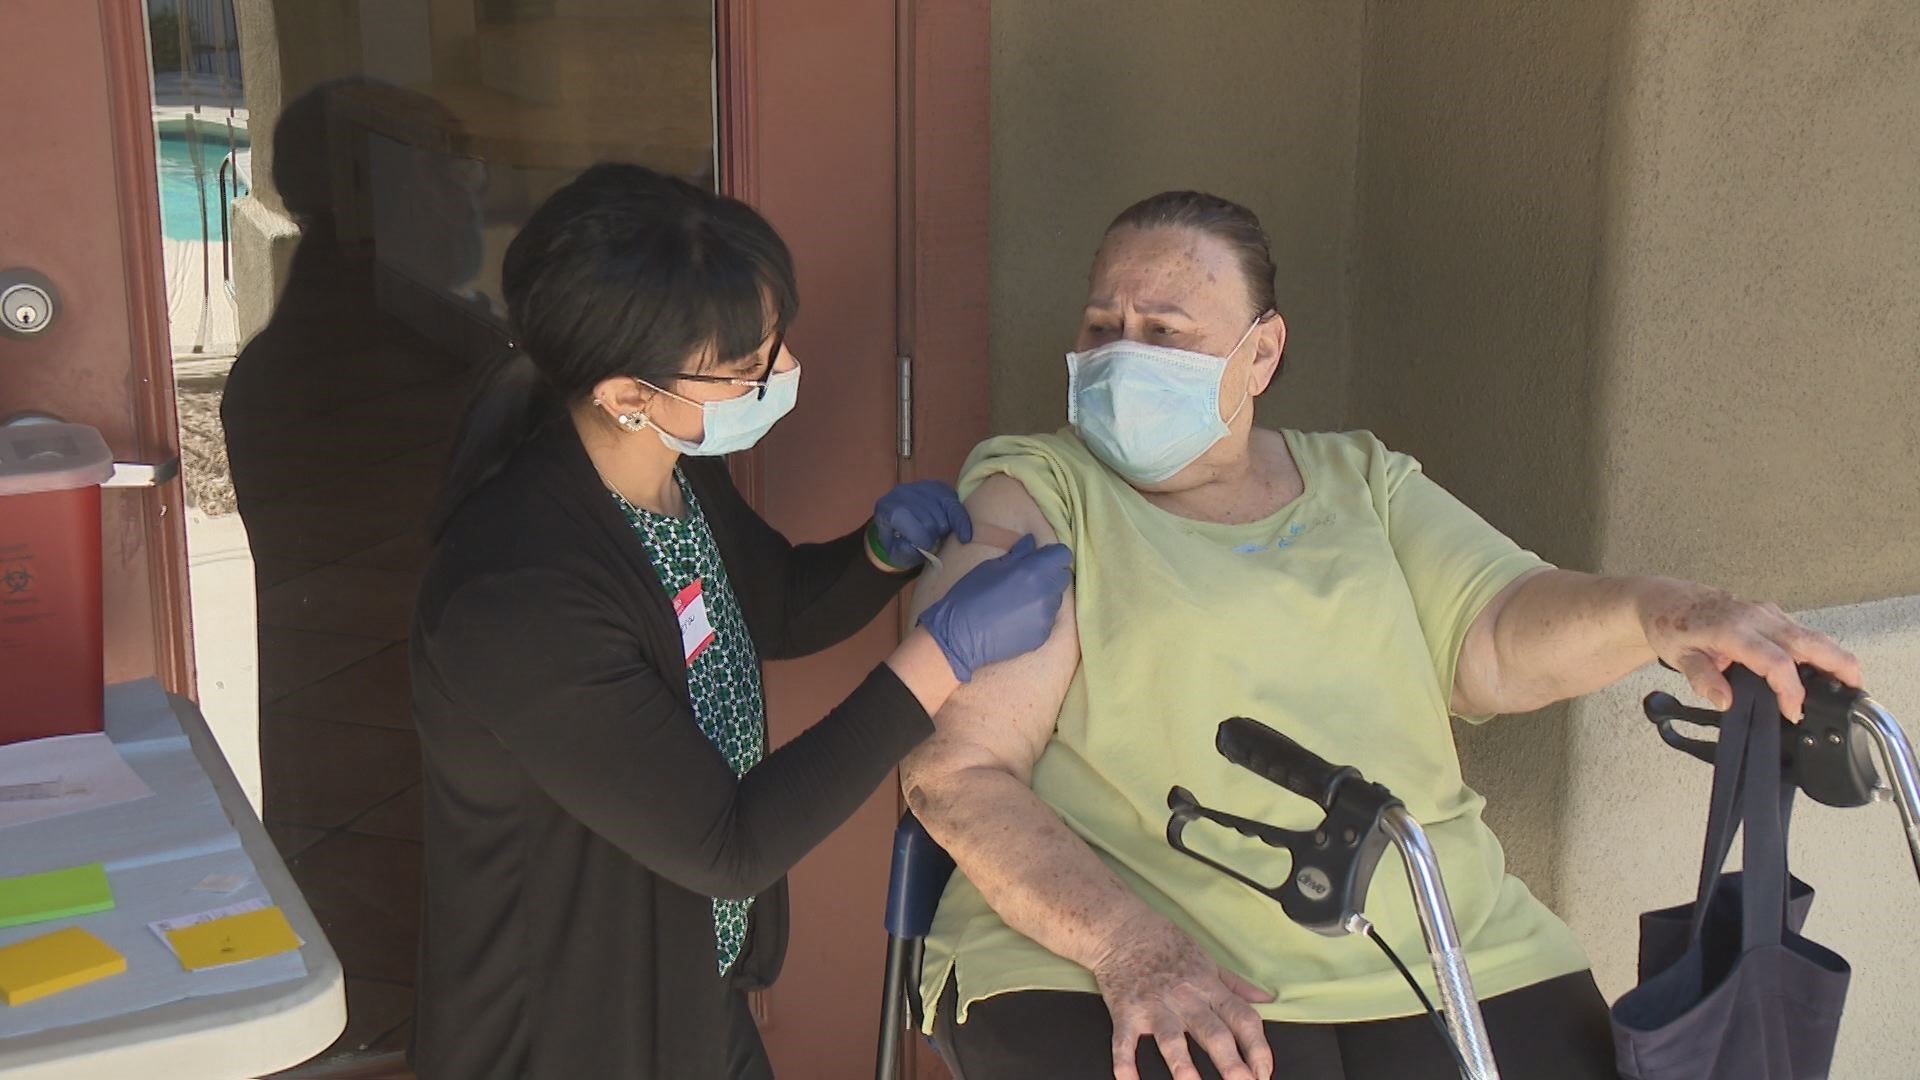 It’s been tough for many seniors in the Valley to get vaccinated for a lot of reasons. The City of Phoenix is trying to make it easier for them to get their vaccine.